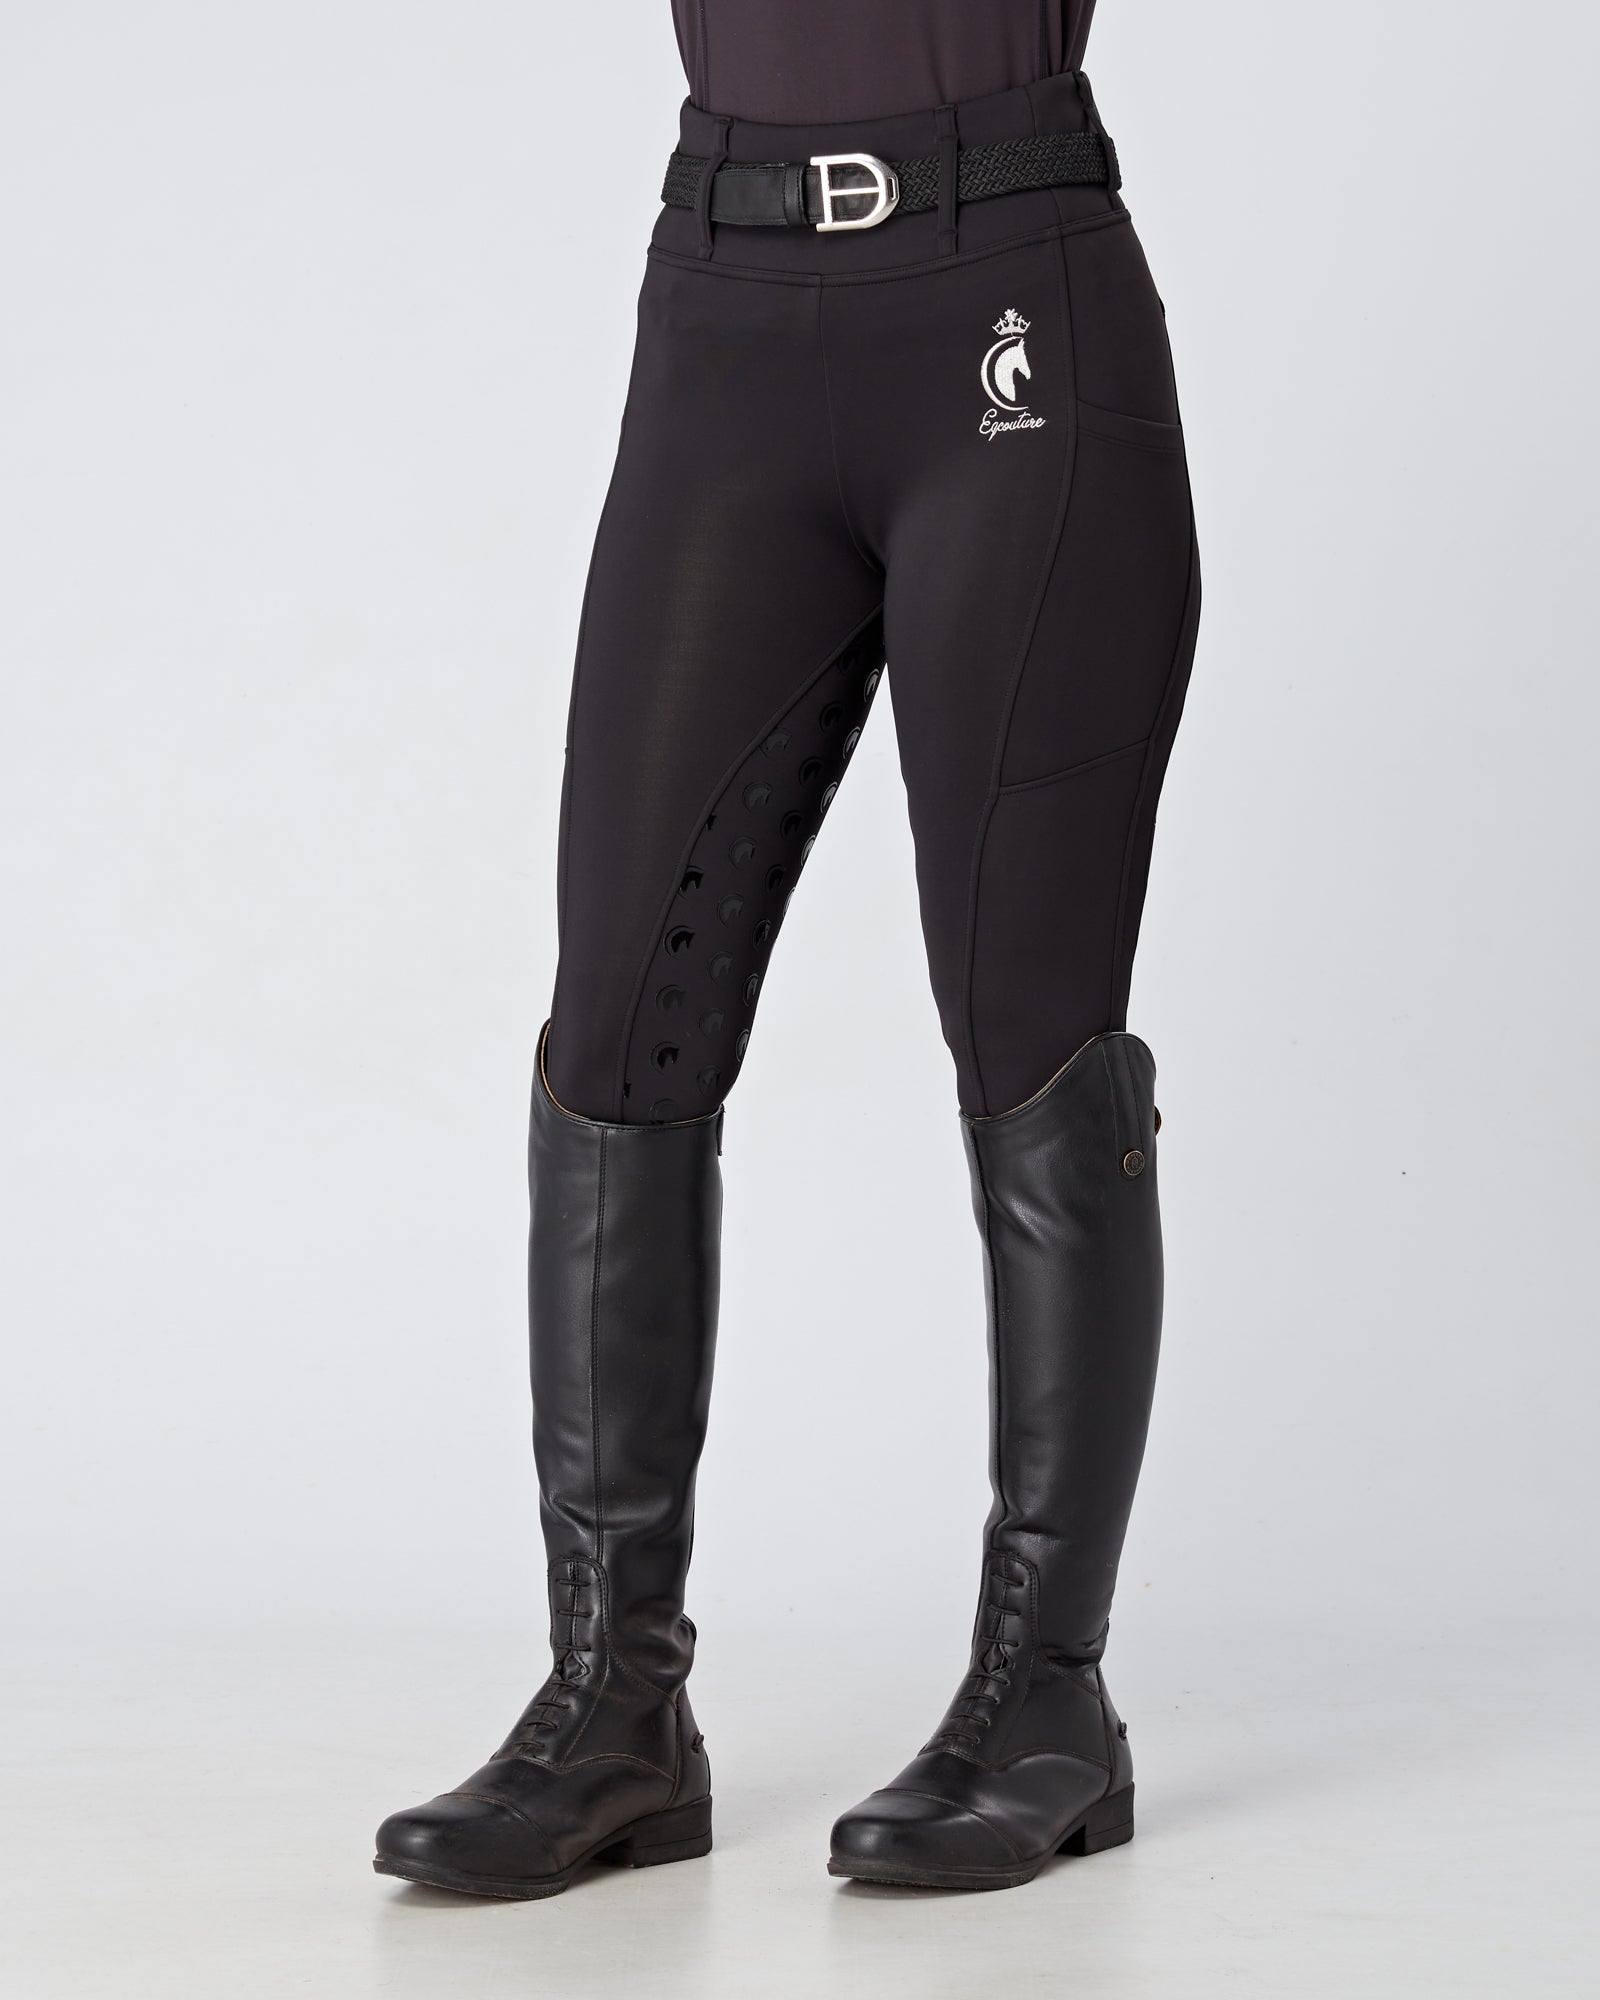 Black Riding Leggings / Tights with Phone Pockets - ALL BLACK